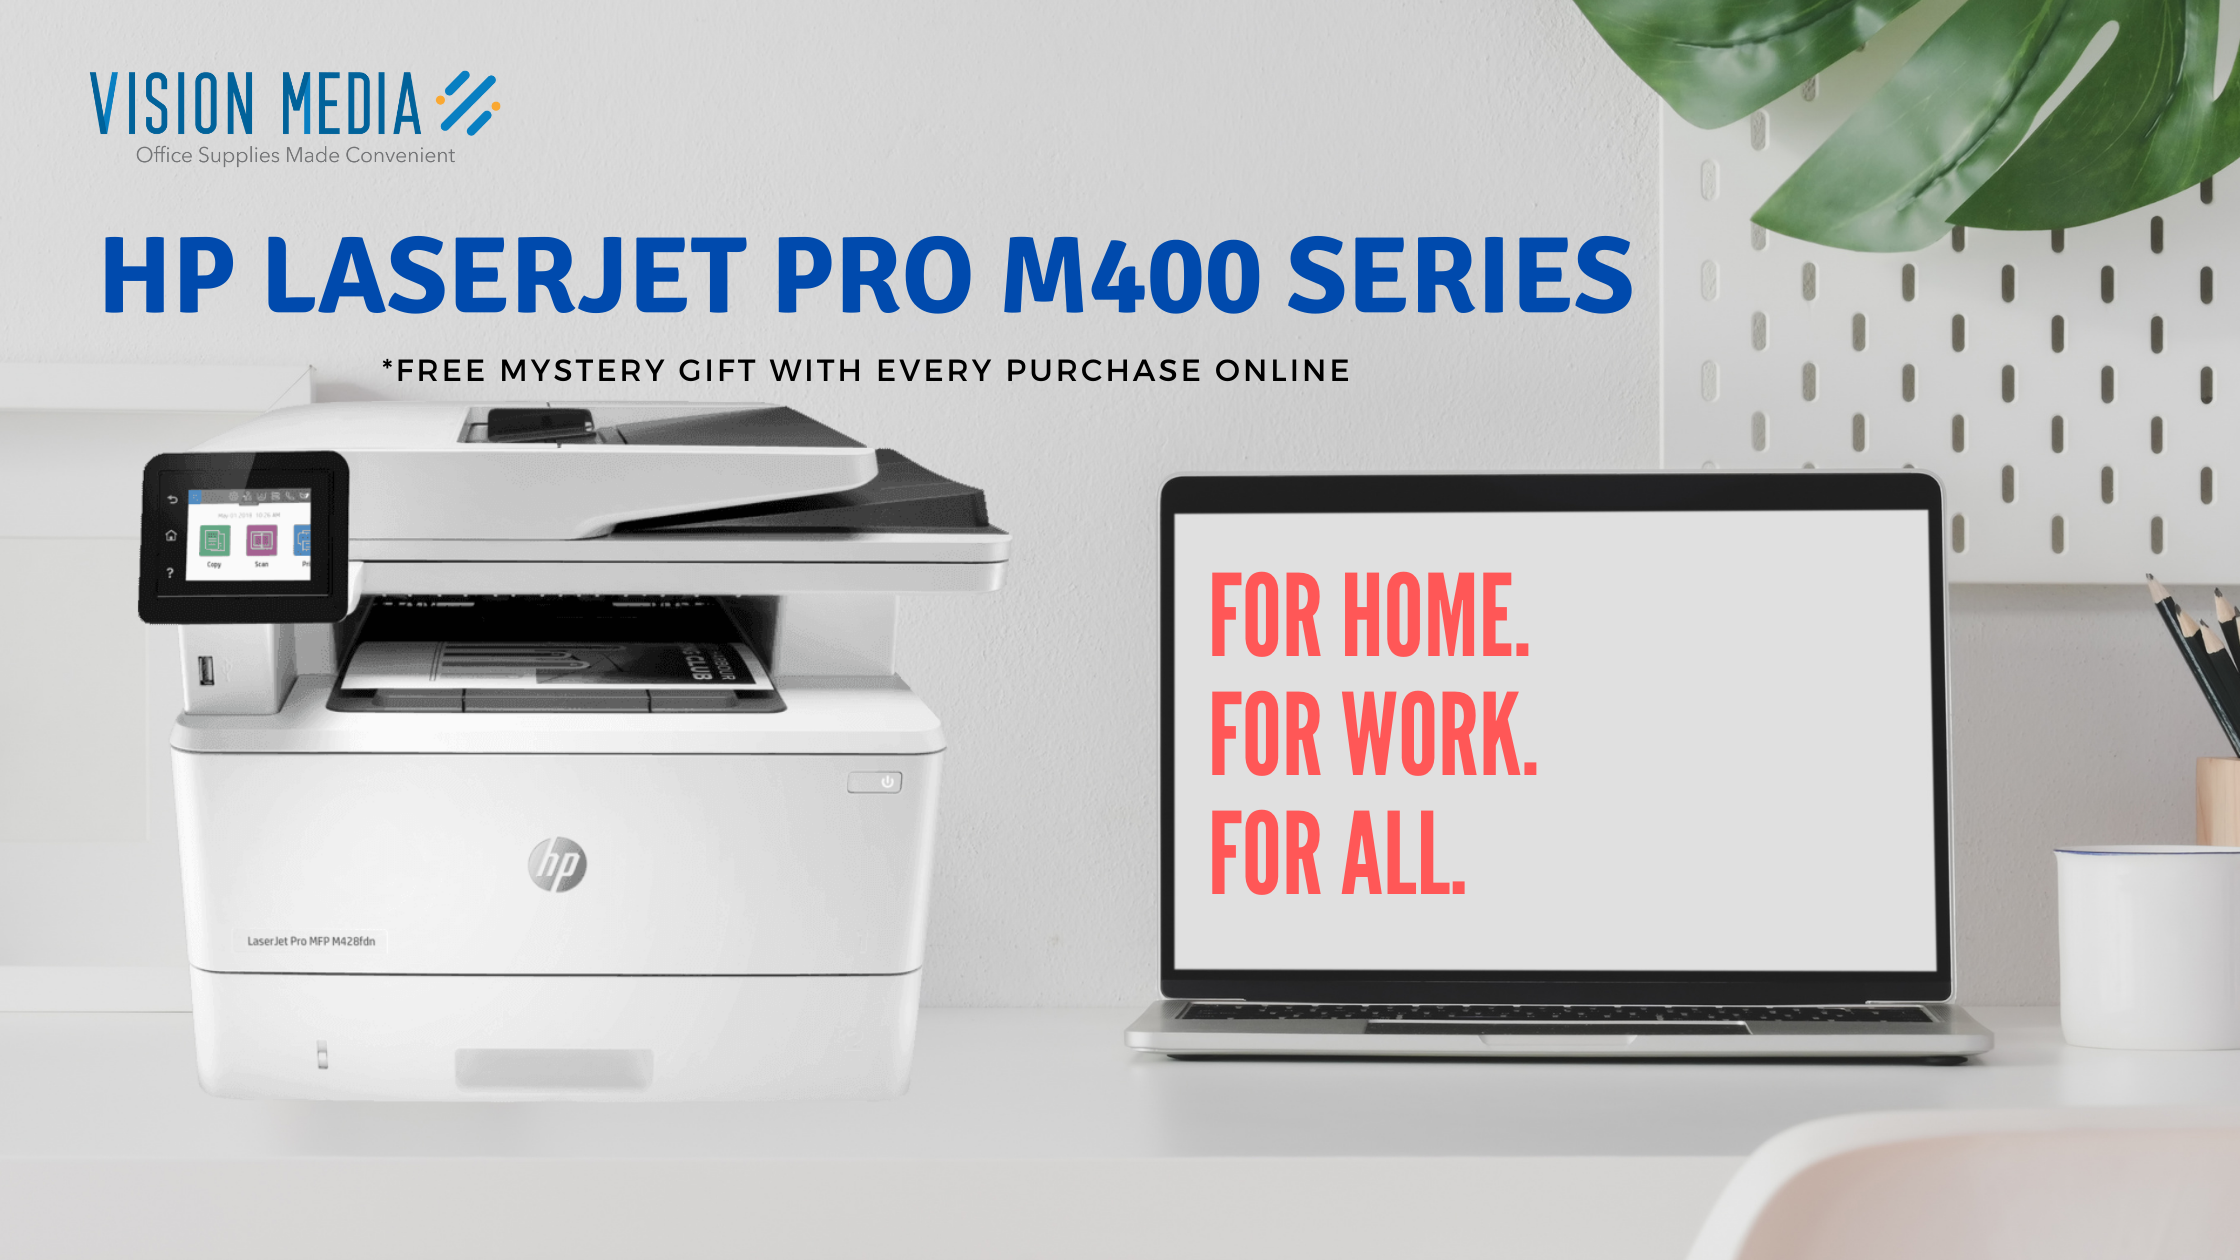 HP LaserJet Pro 400 series - *Free mystery gift with every purchase online